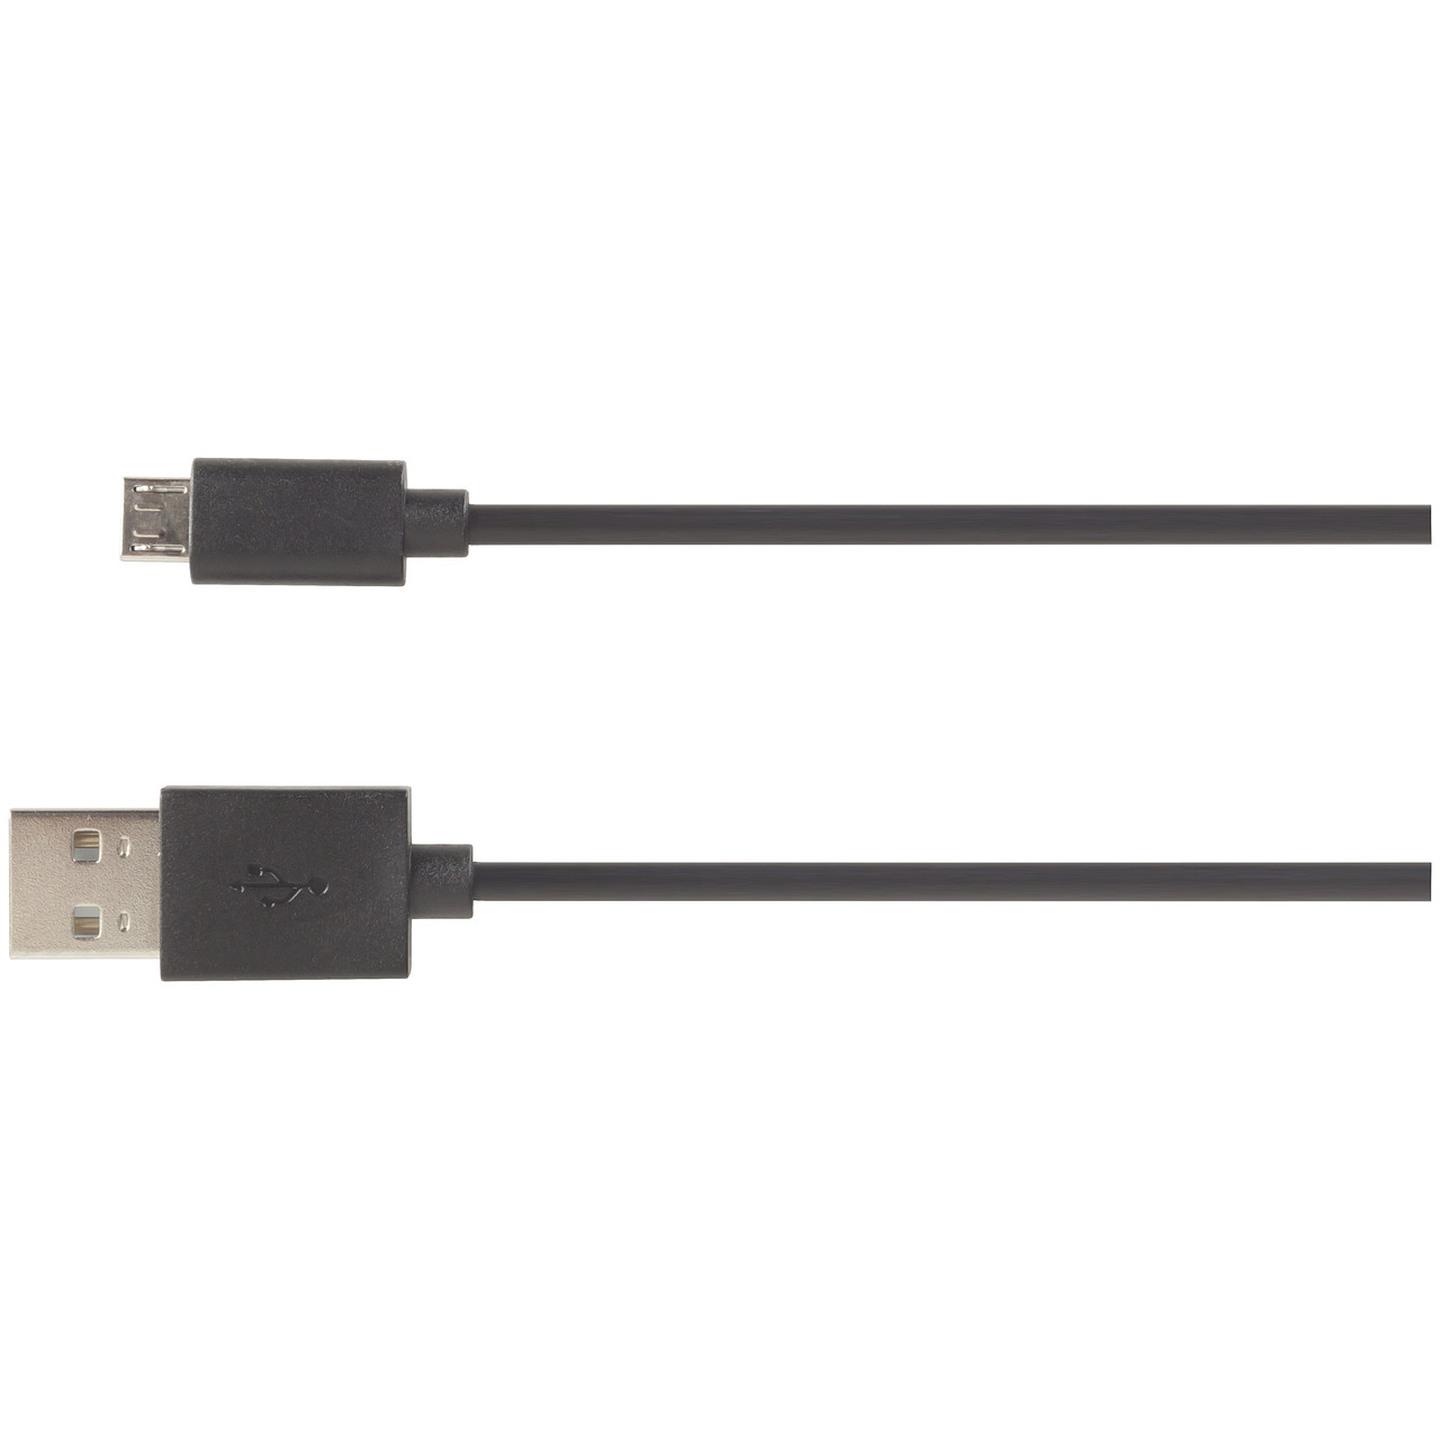 Power Boosting USB A to USB Micro B Cable 1.8m